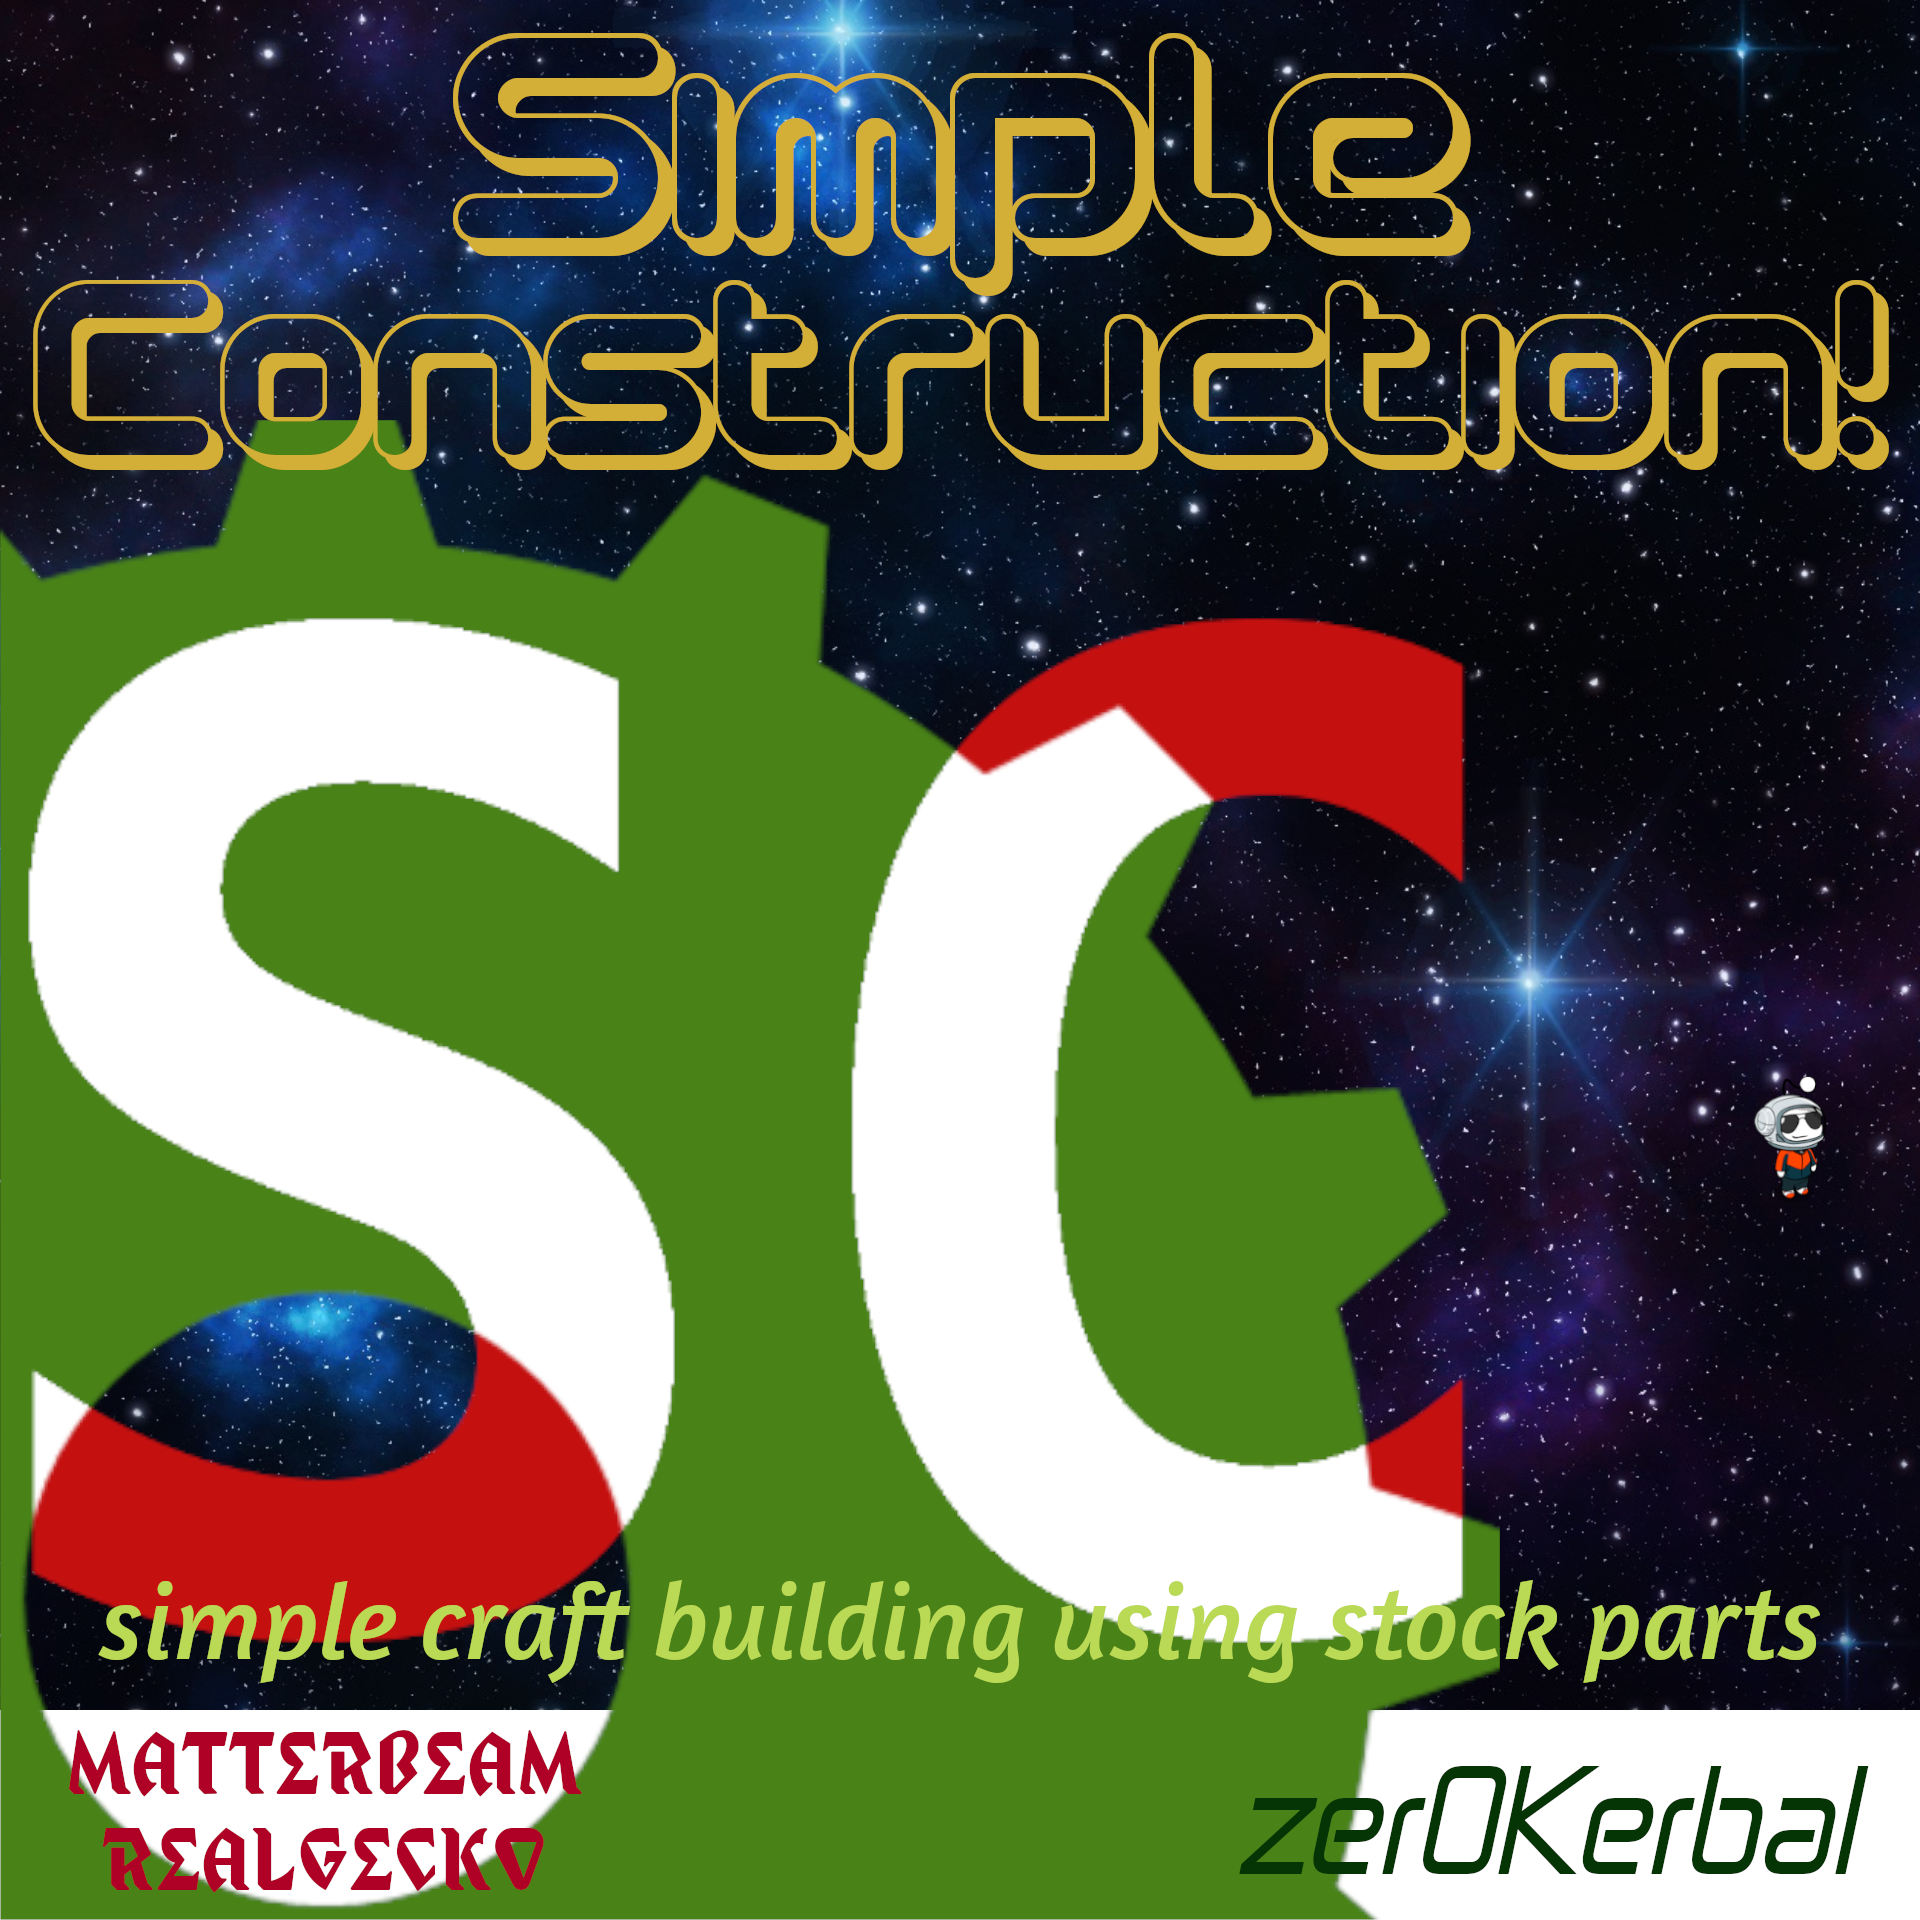 SimpleConstruction! (SCON) by matterbeam project avatar